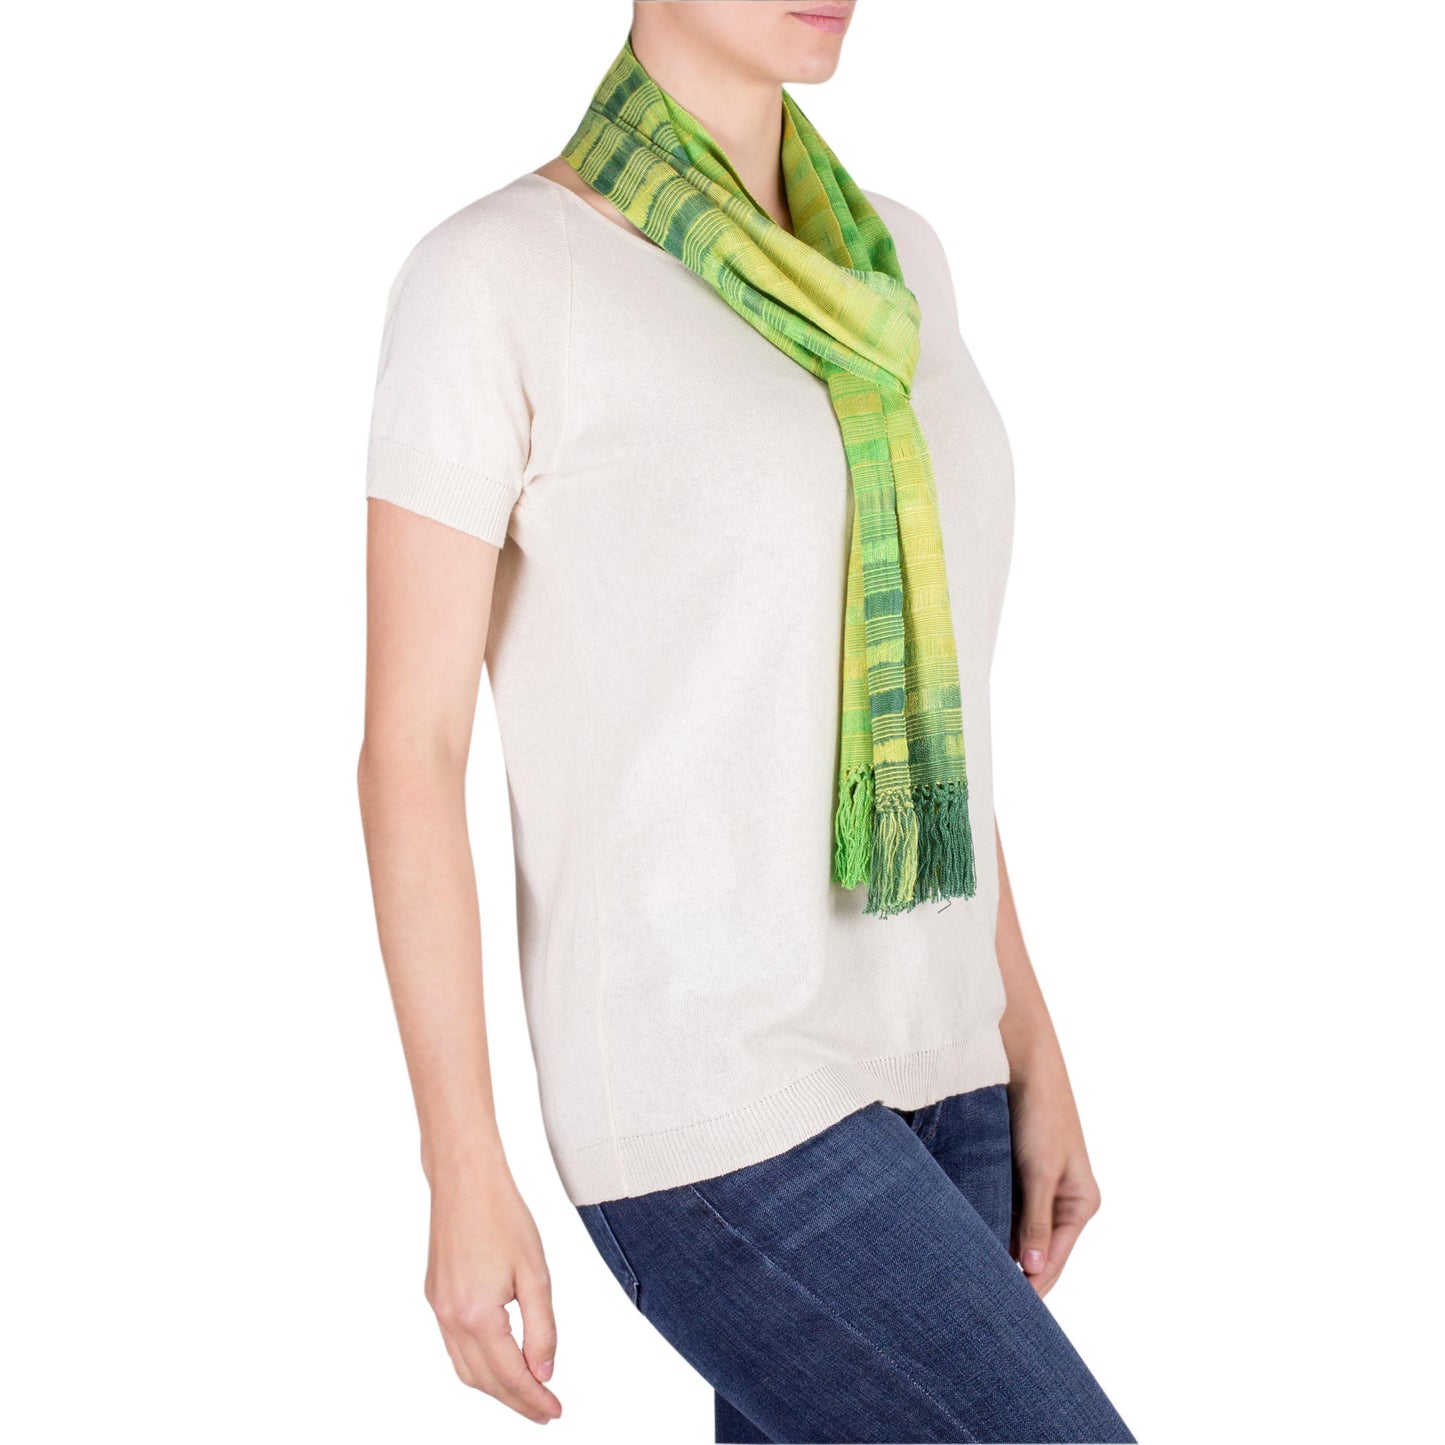 Evergreen Backstrap Rayon Chenille Handmade Scarf in Shades of Green